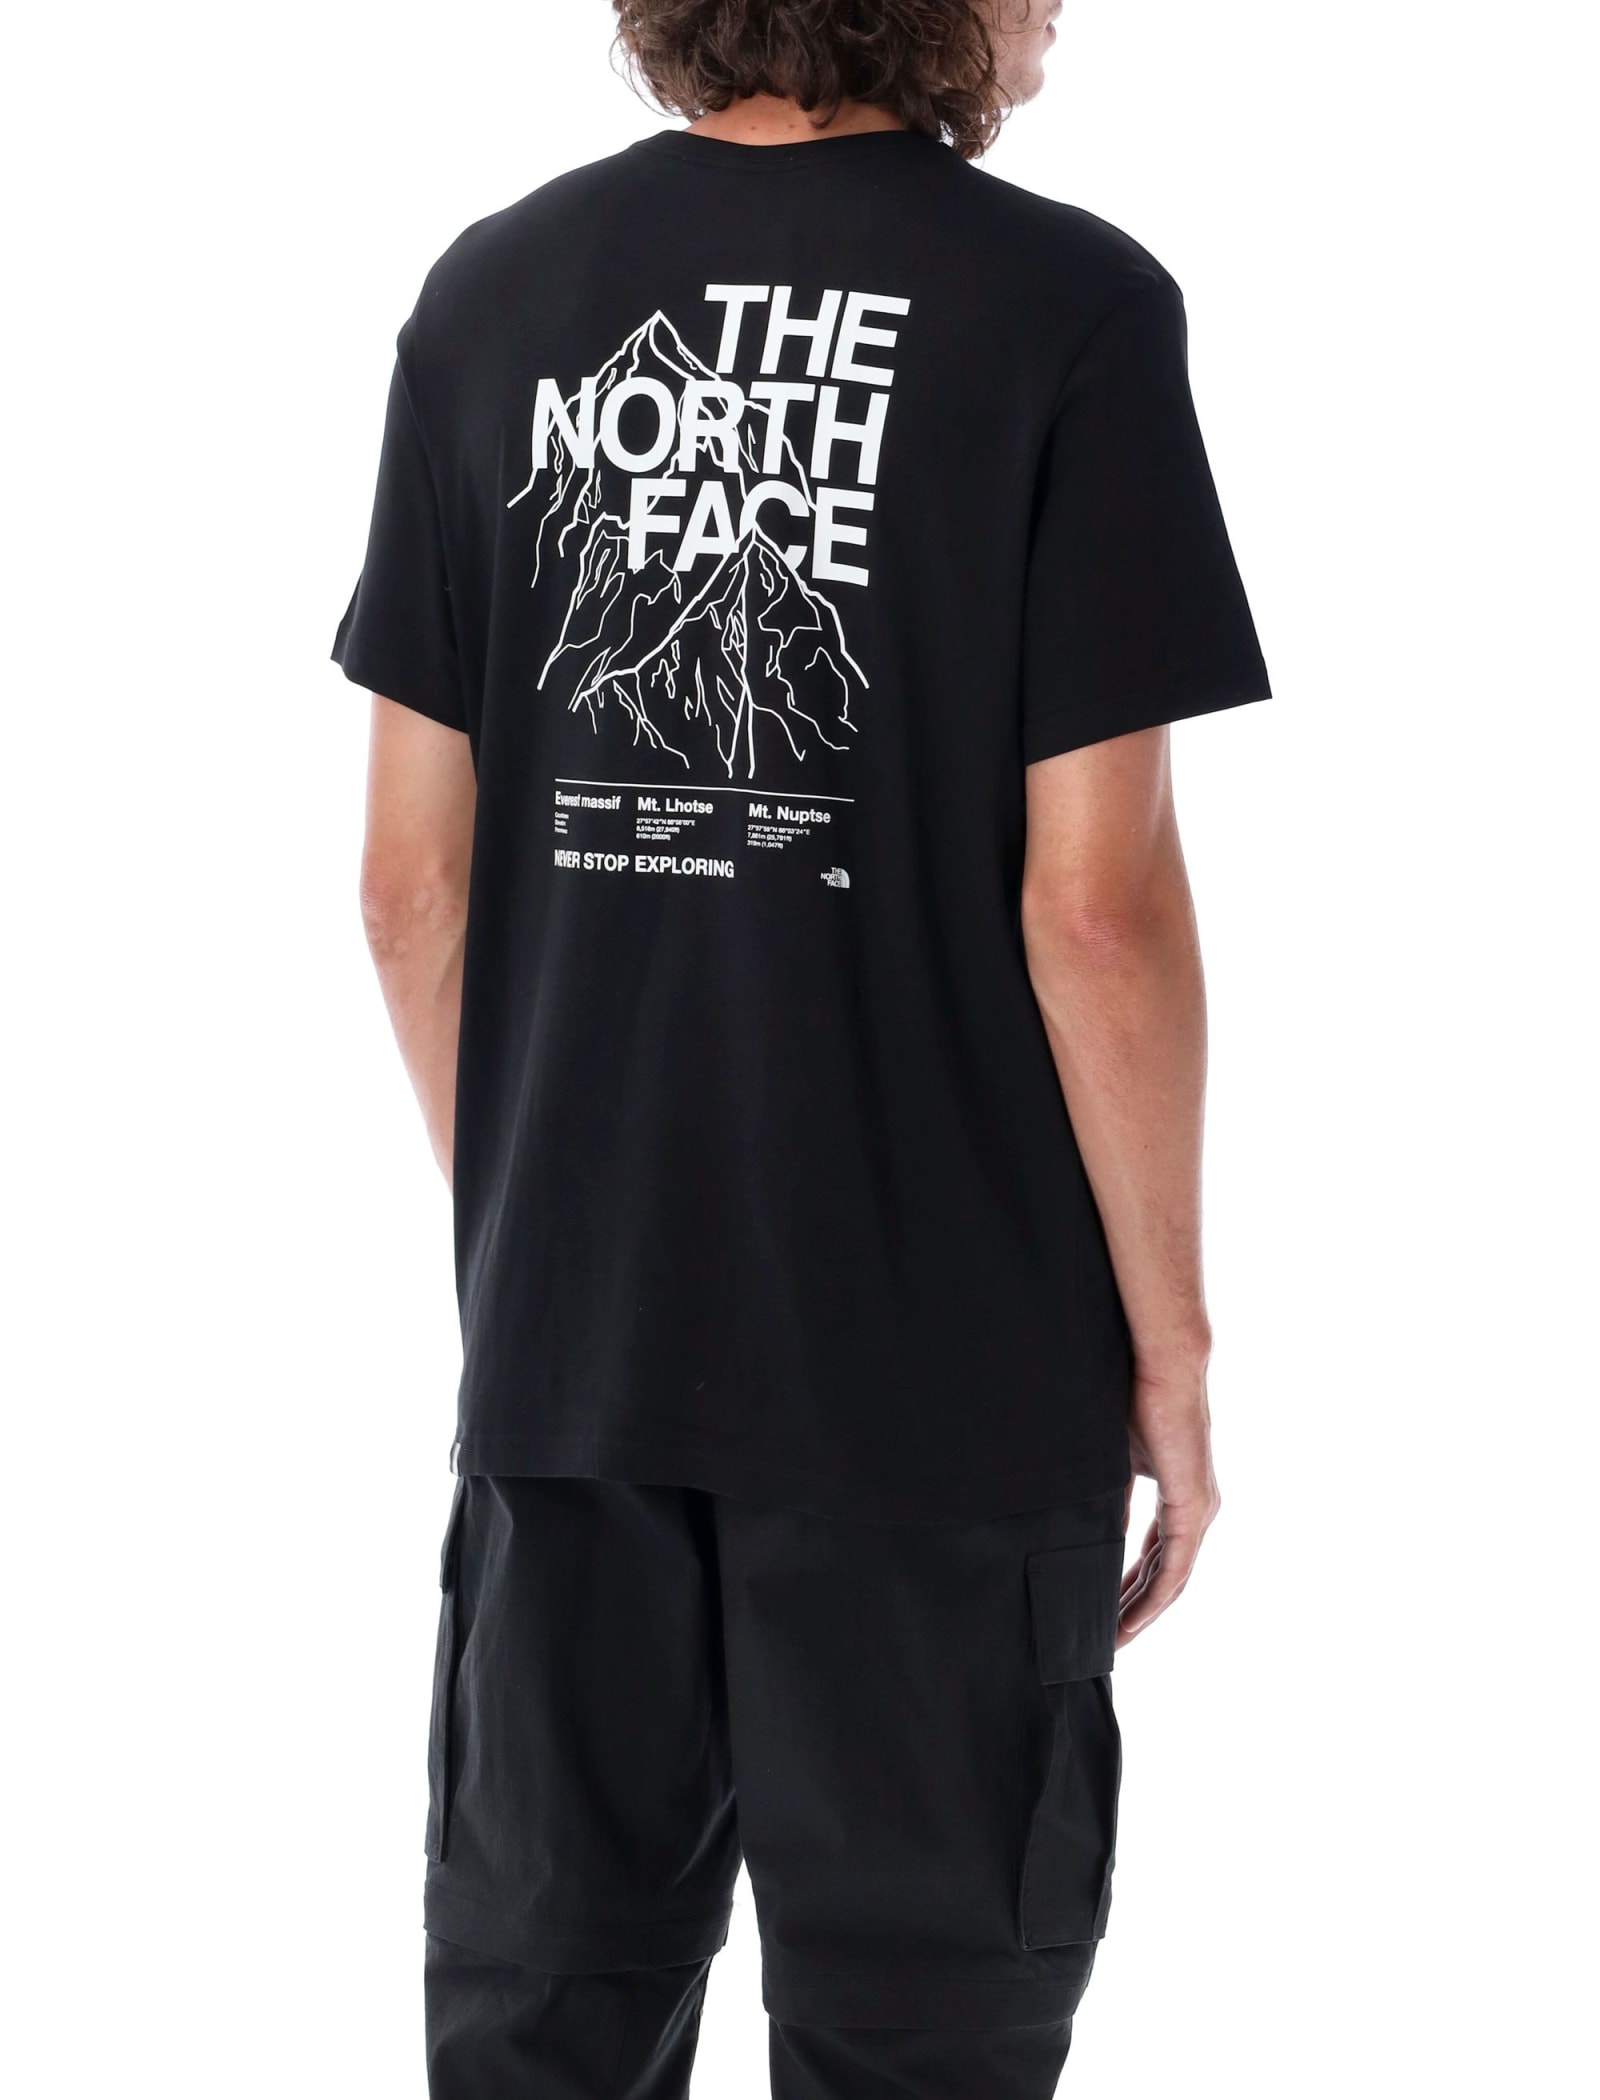 The North Face Mountain Outline back print sweatshirt in stone